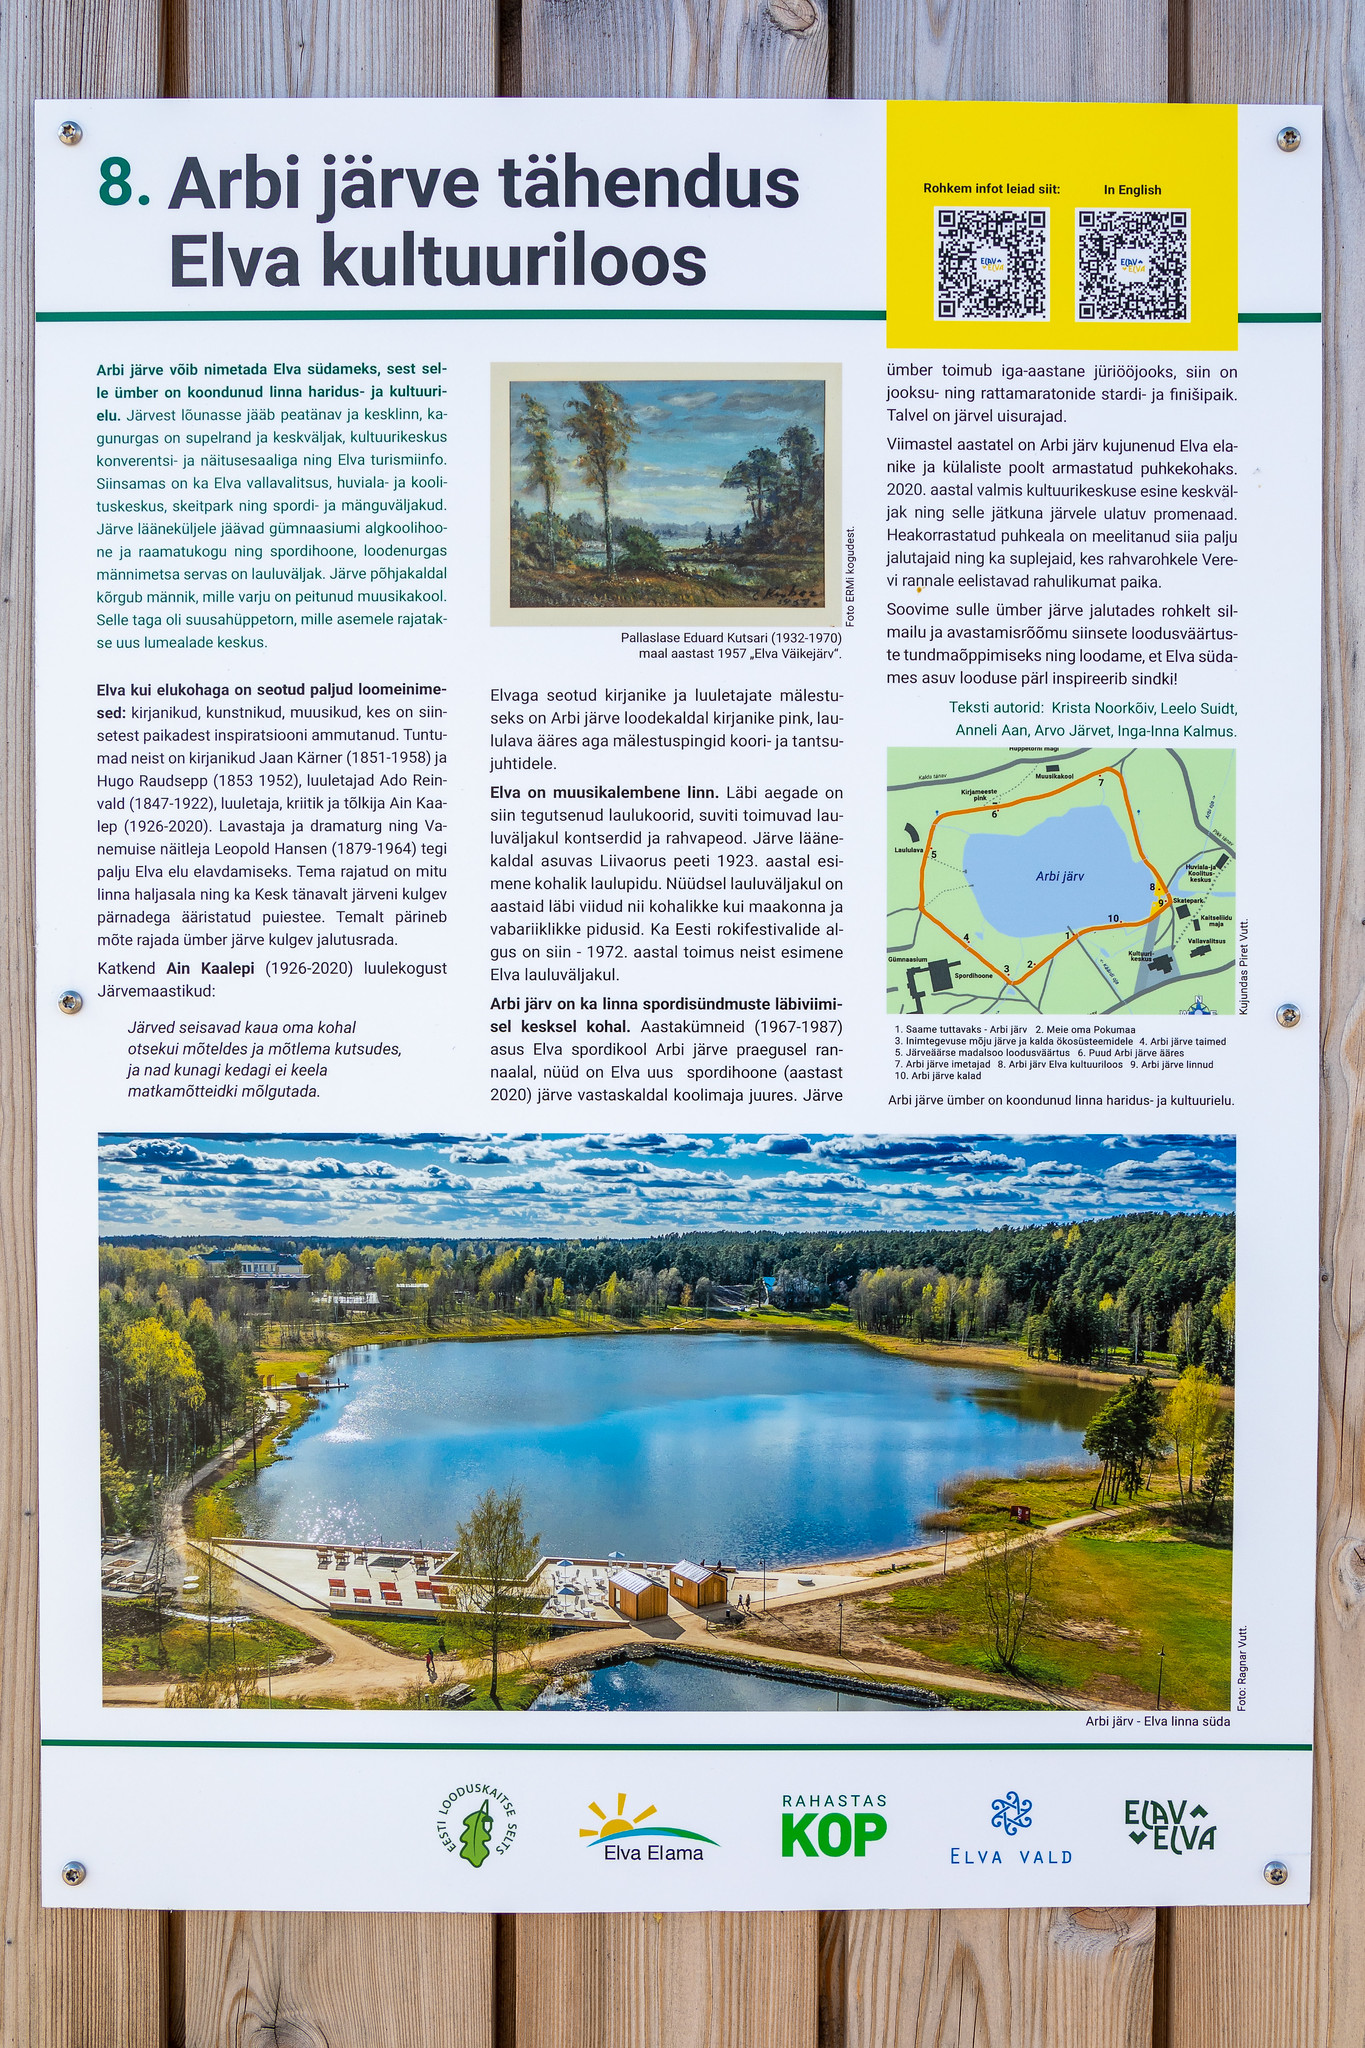 The meaning of Lake Arbi in the cultural story of Elva - information on the board